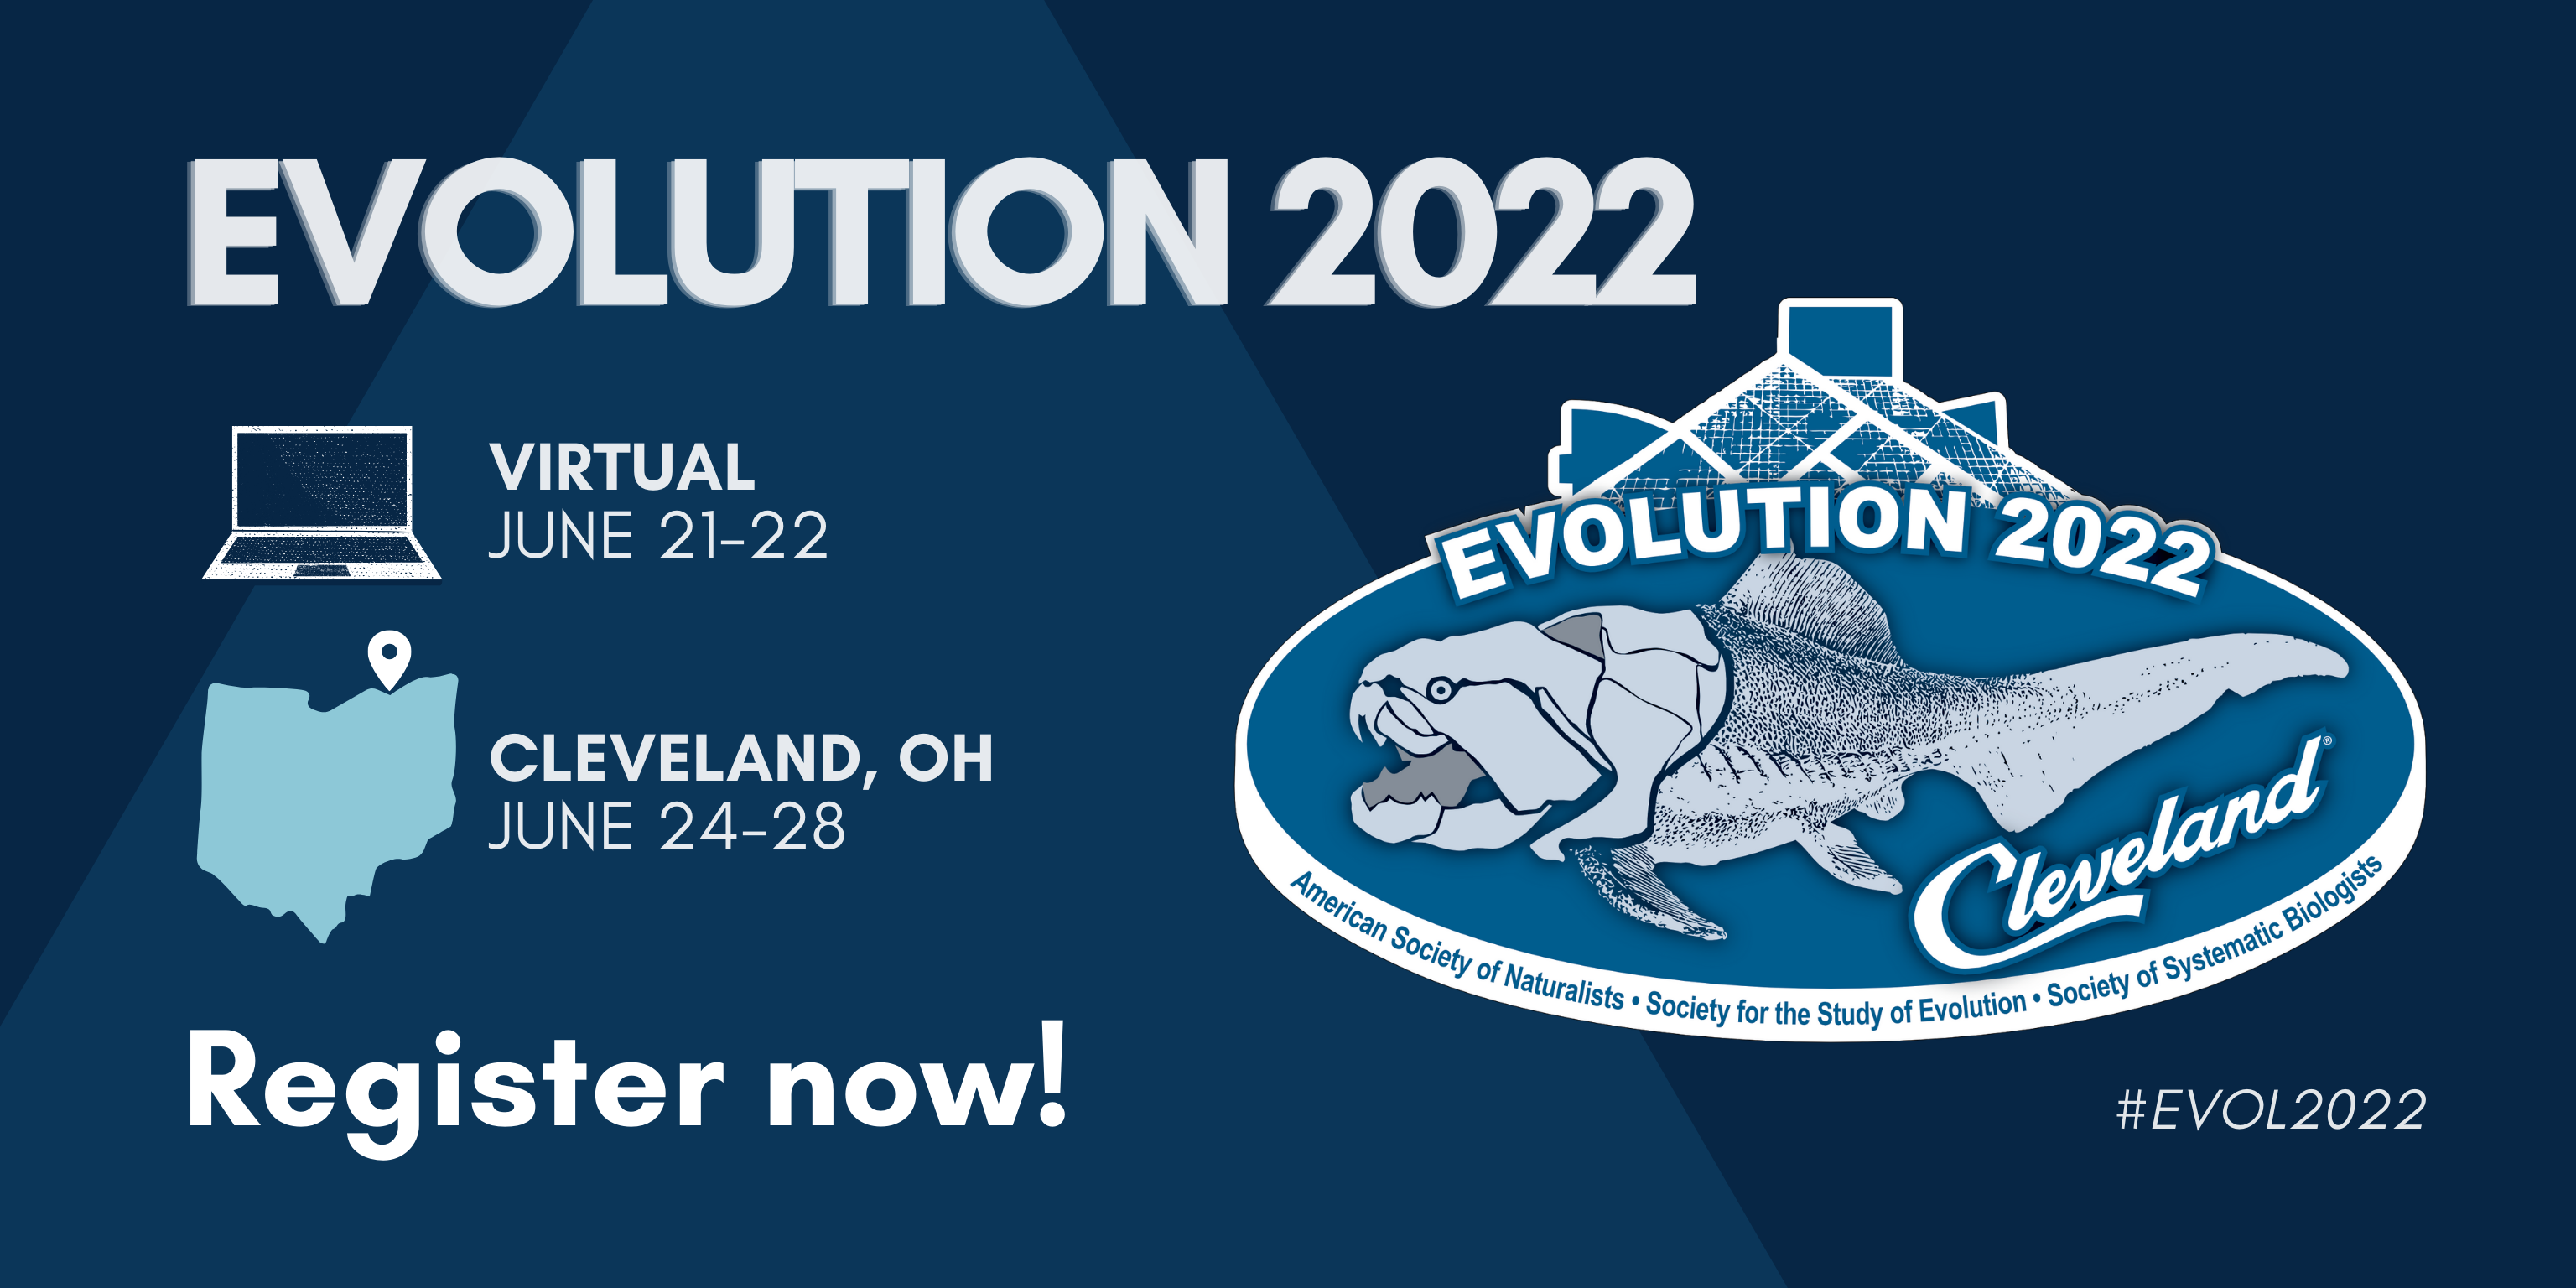 The words Evolution 2022, Register Now next to the meeting logo. There is a laptop next to the words Virtual, June 21-22 and an outline of the state of Ohio next to the words Cleveland, OH, June 24-28.